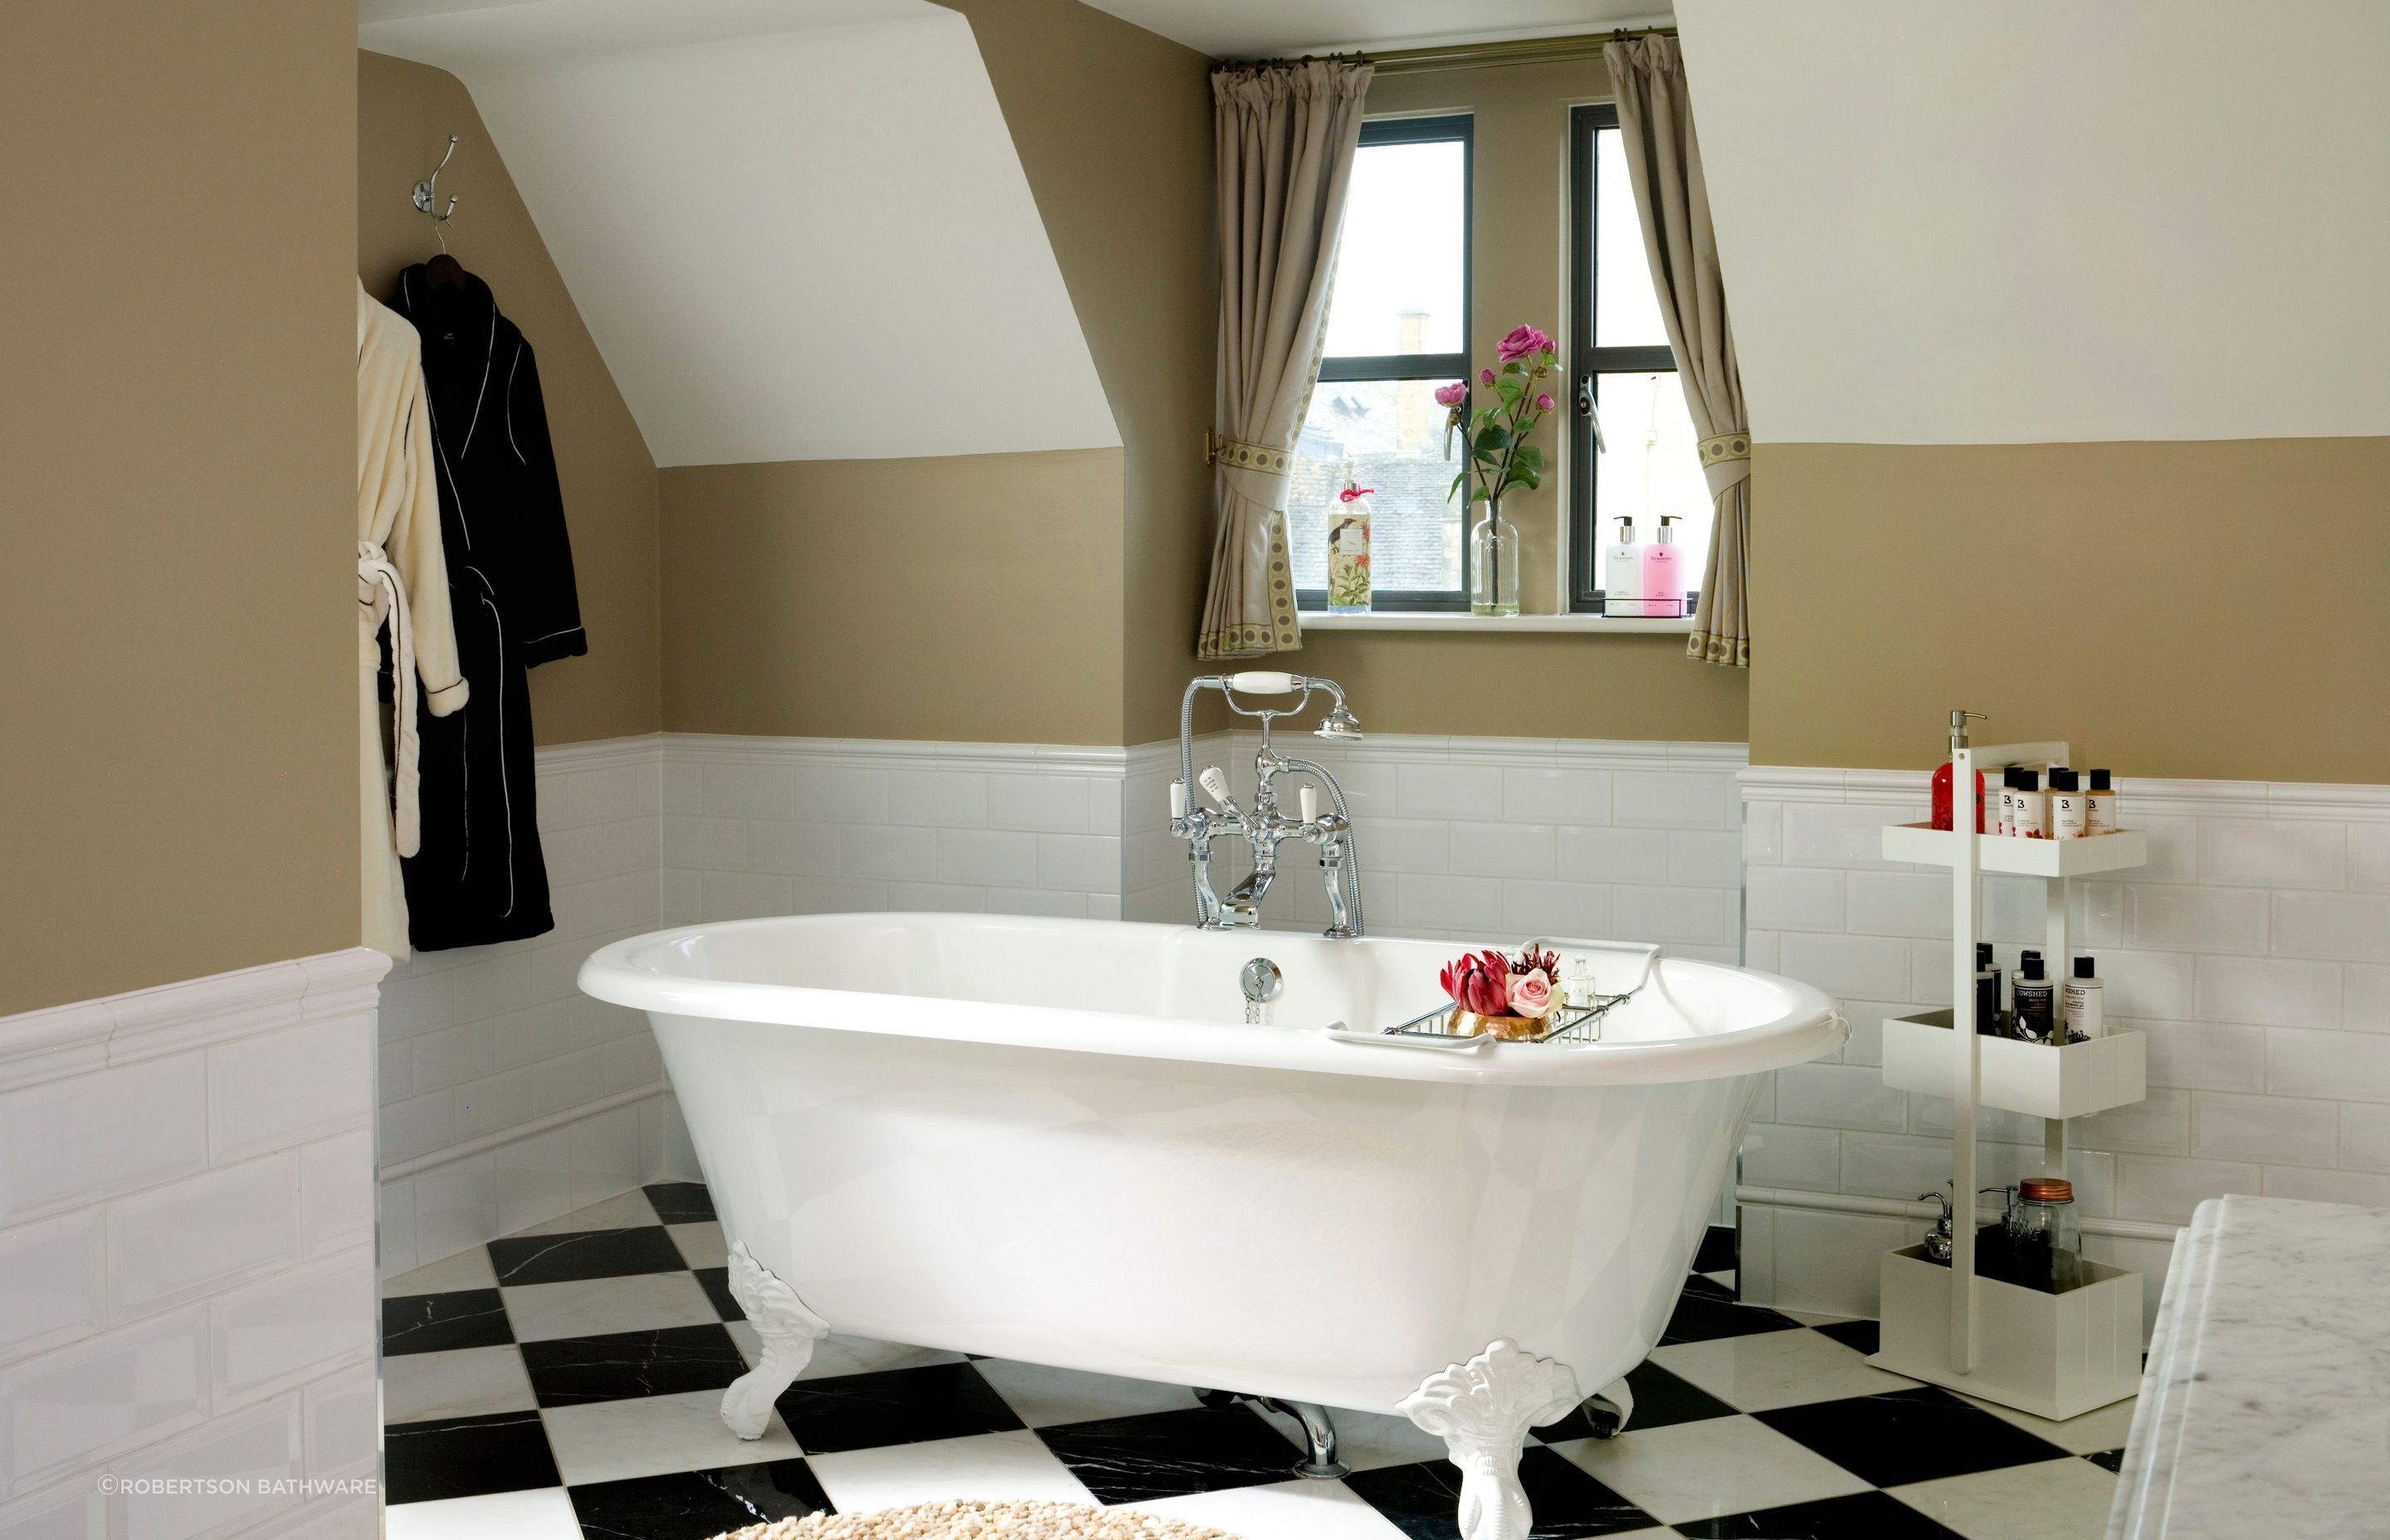 The Cheshire Claw Foot Tub in the Victorian double ended roll top style is a timeless classic